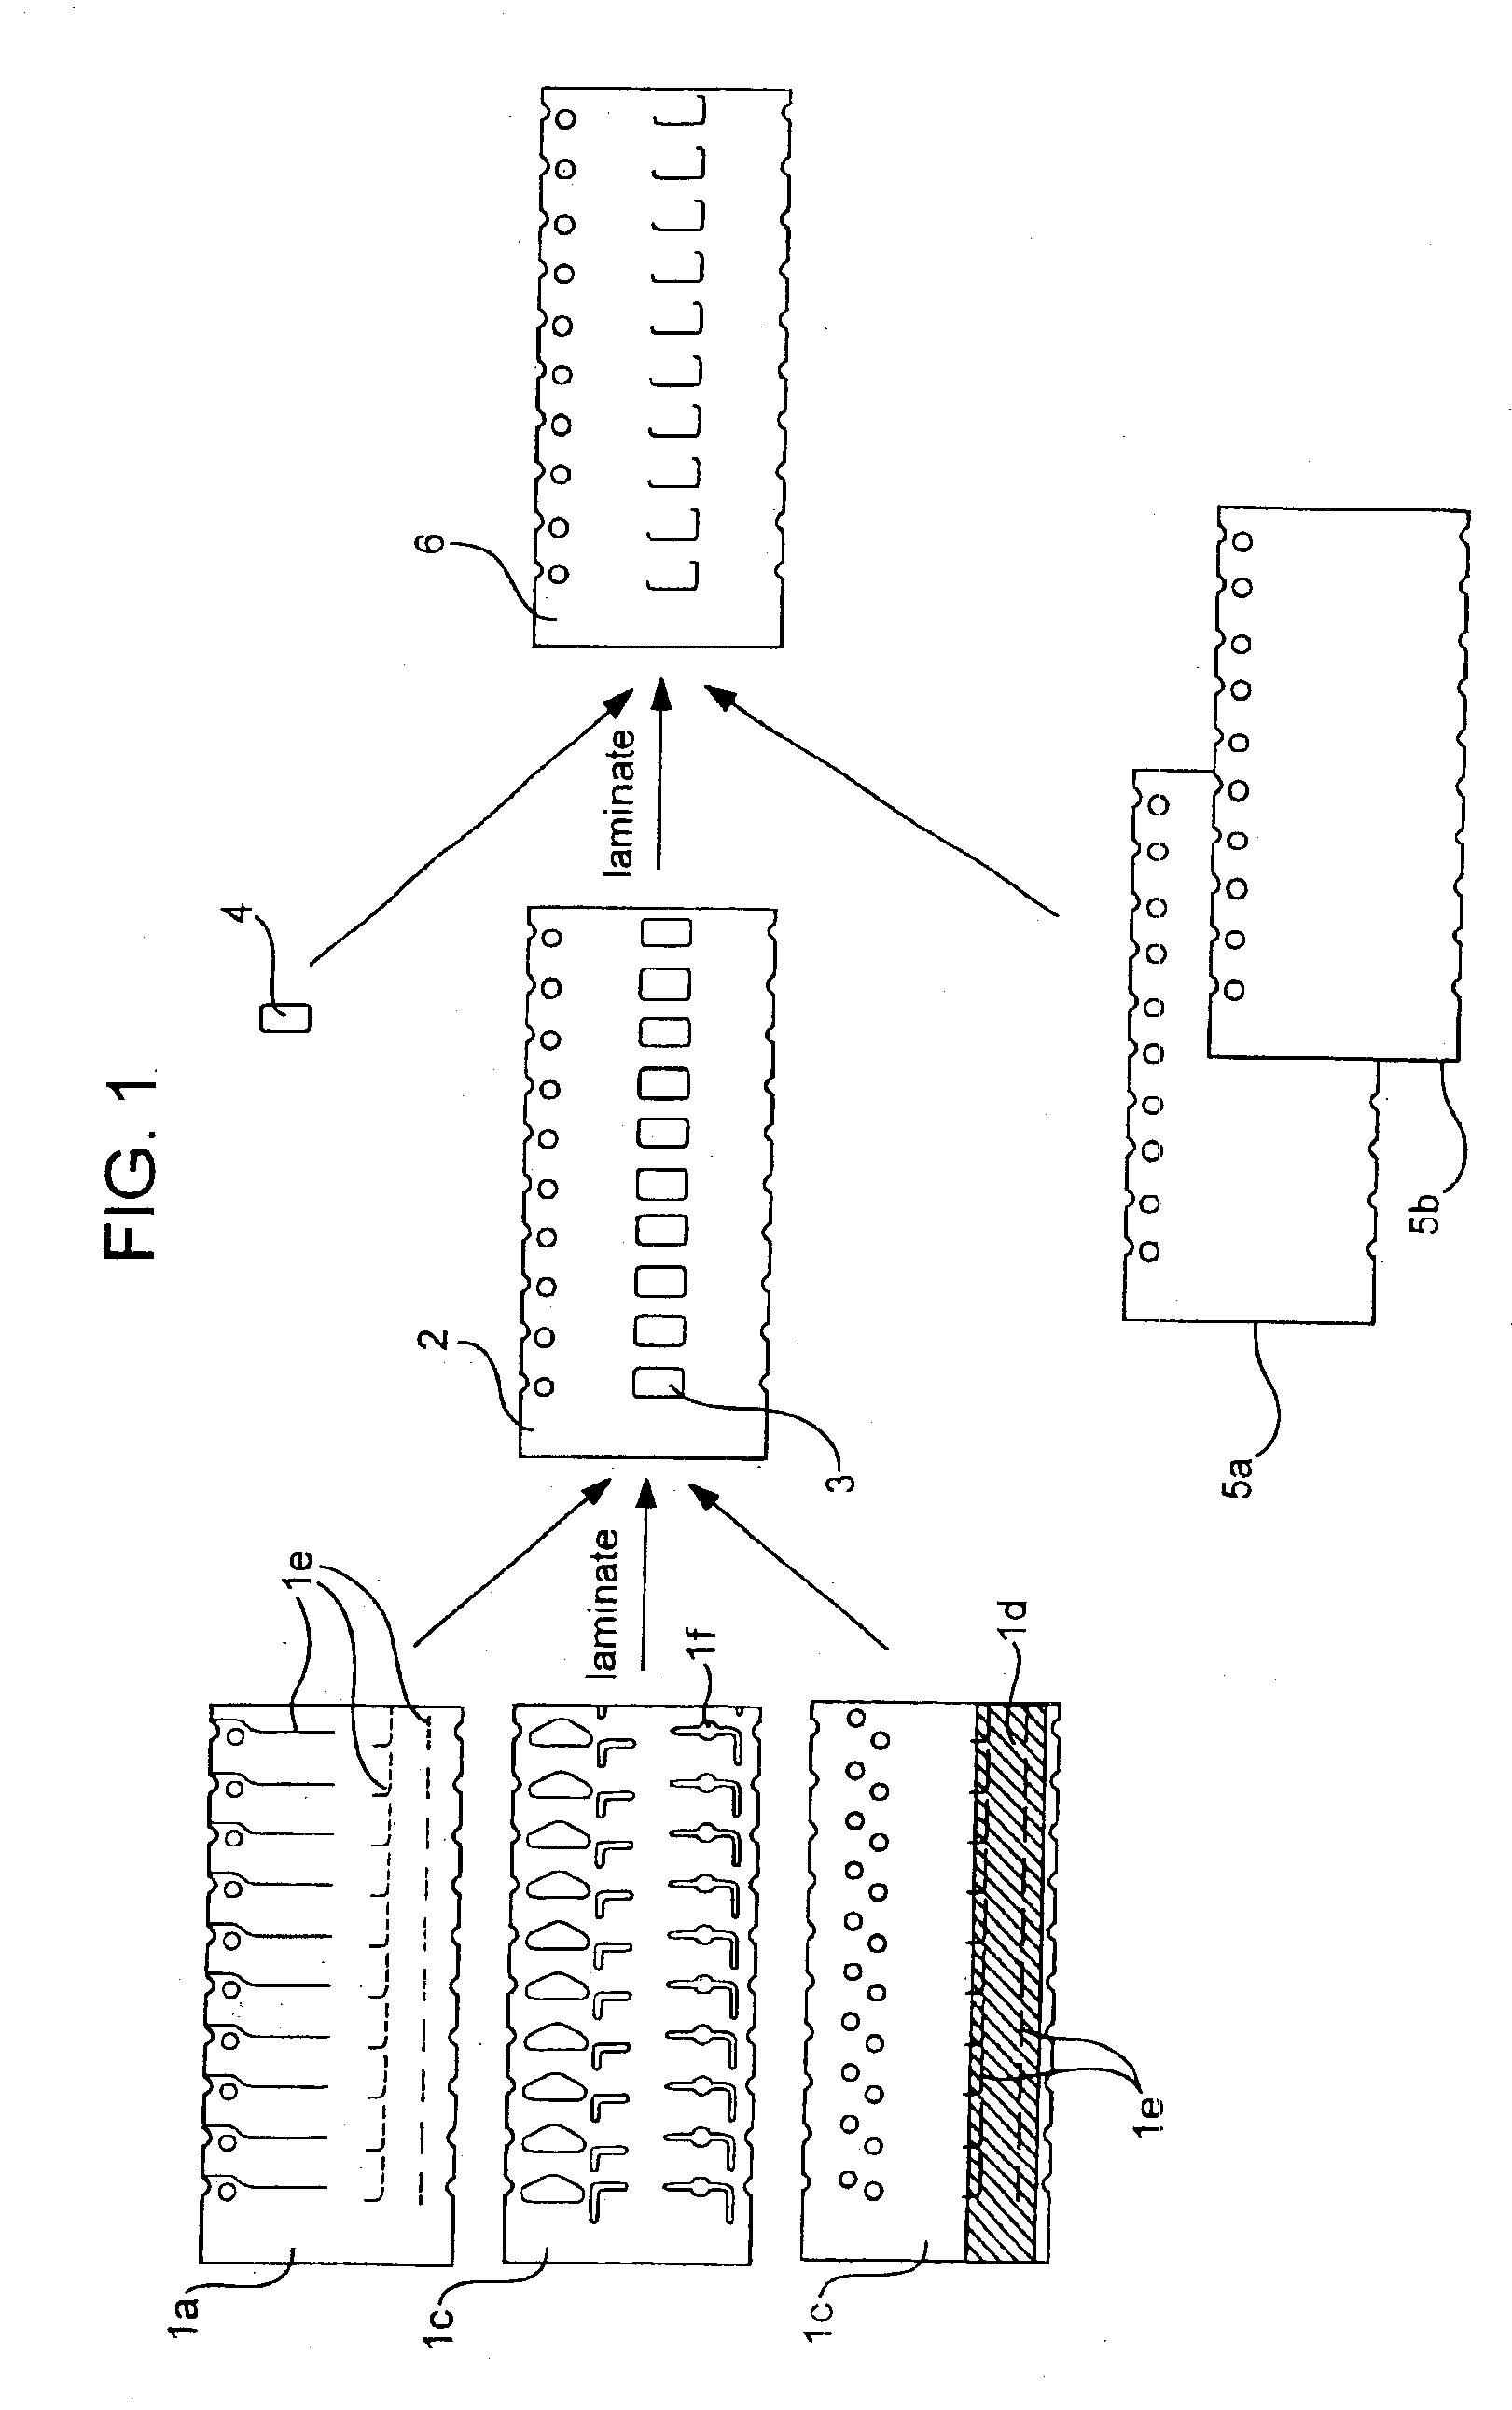 Electrochemical test strip cards that include an integral dessicant